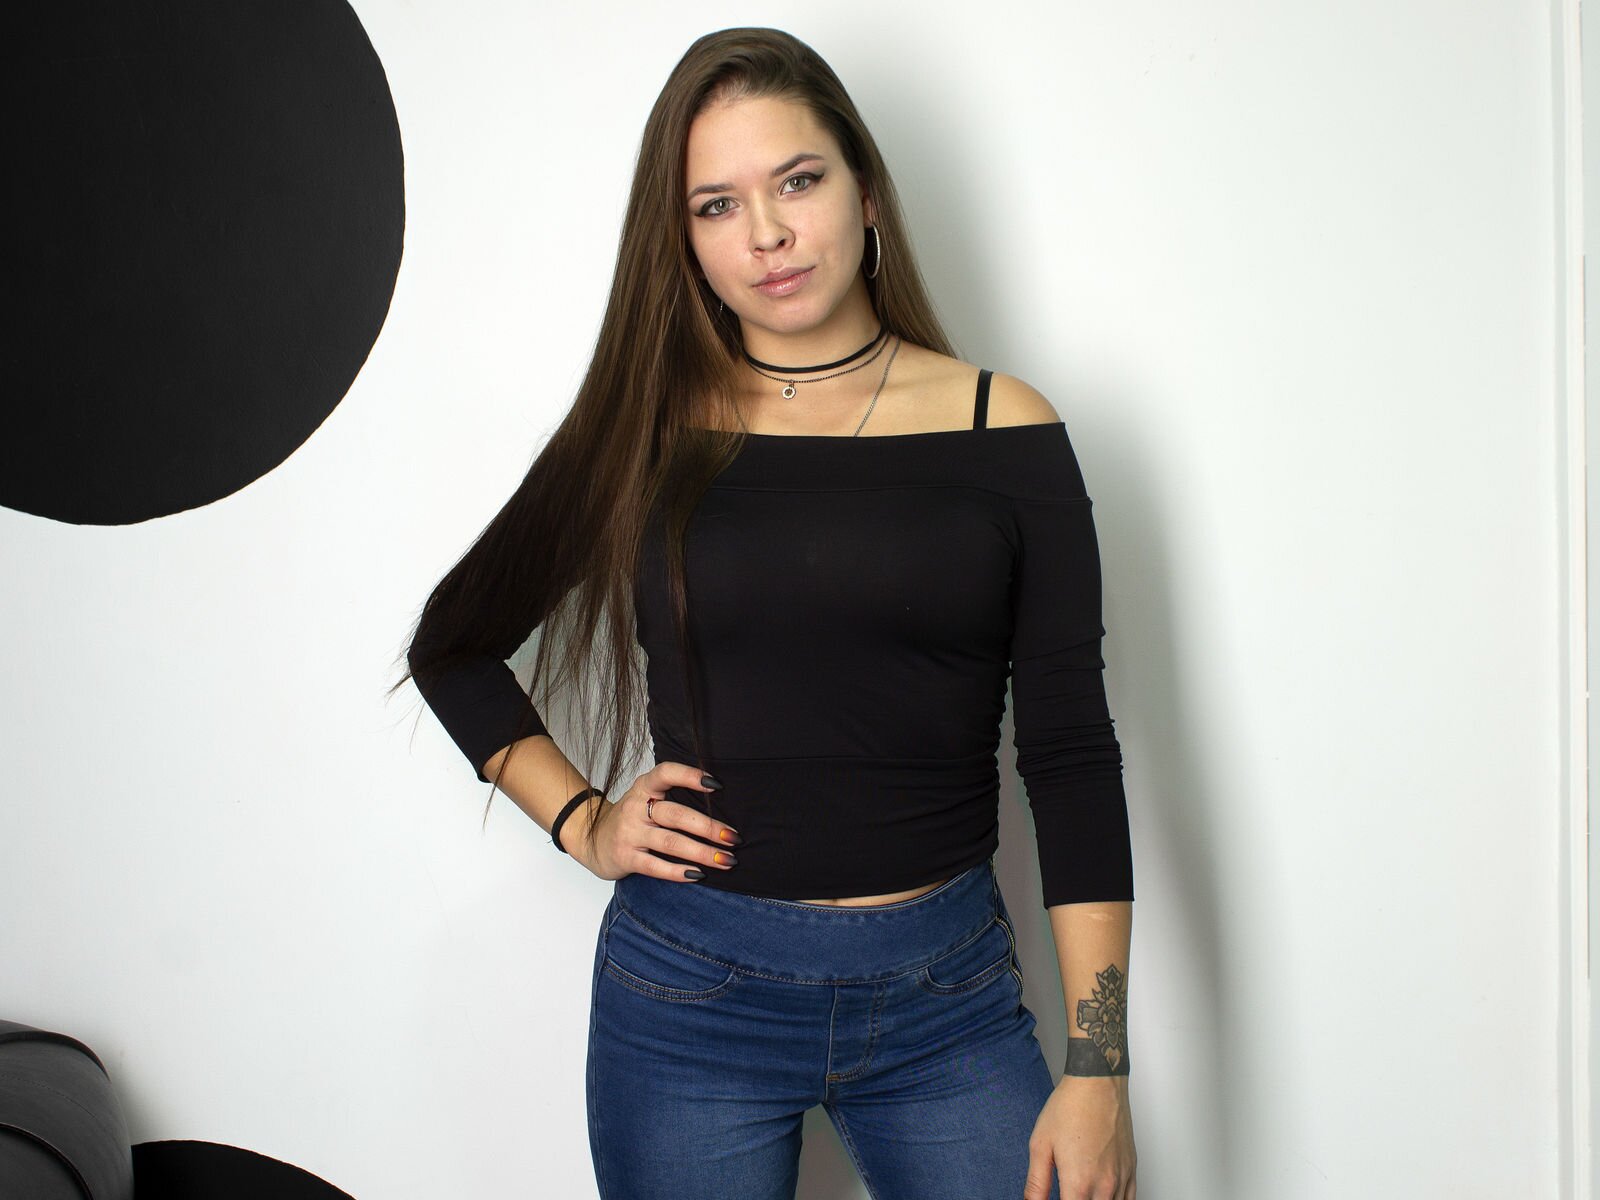 Free Live Sex Chat With LisaBlare